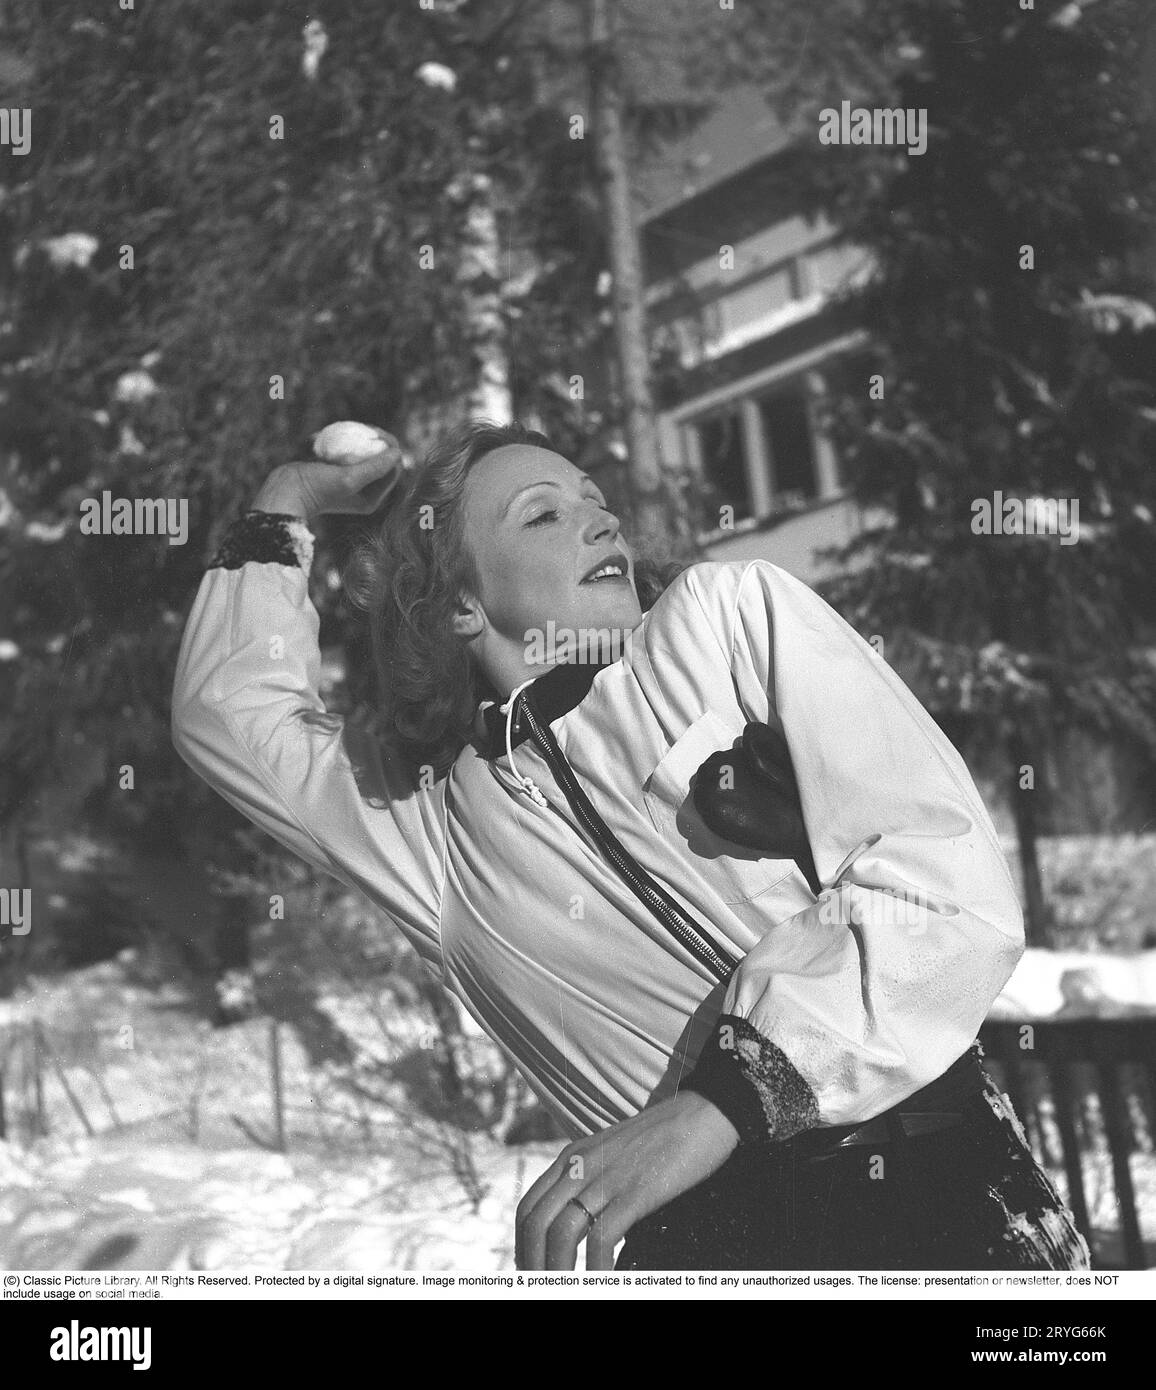 Inga Tidblad, 1901-1975, Swedish actress. She is dressed in typical 40s ski clothes when throwes a snowball at something or someone... Sweden 1942. Kristoffersson ref 229-2 Stock Photo